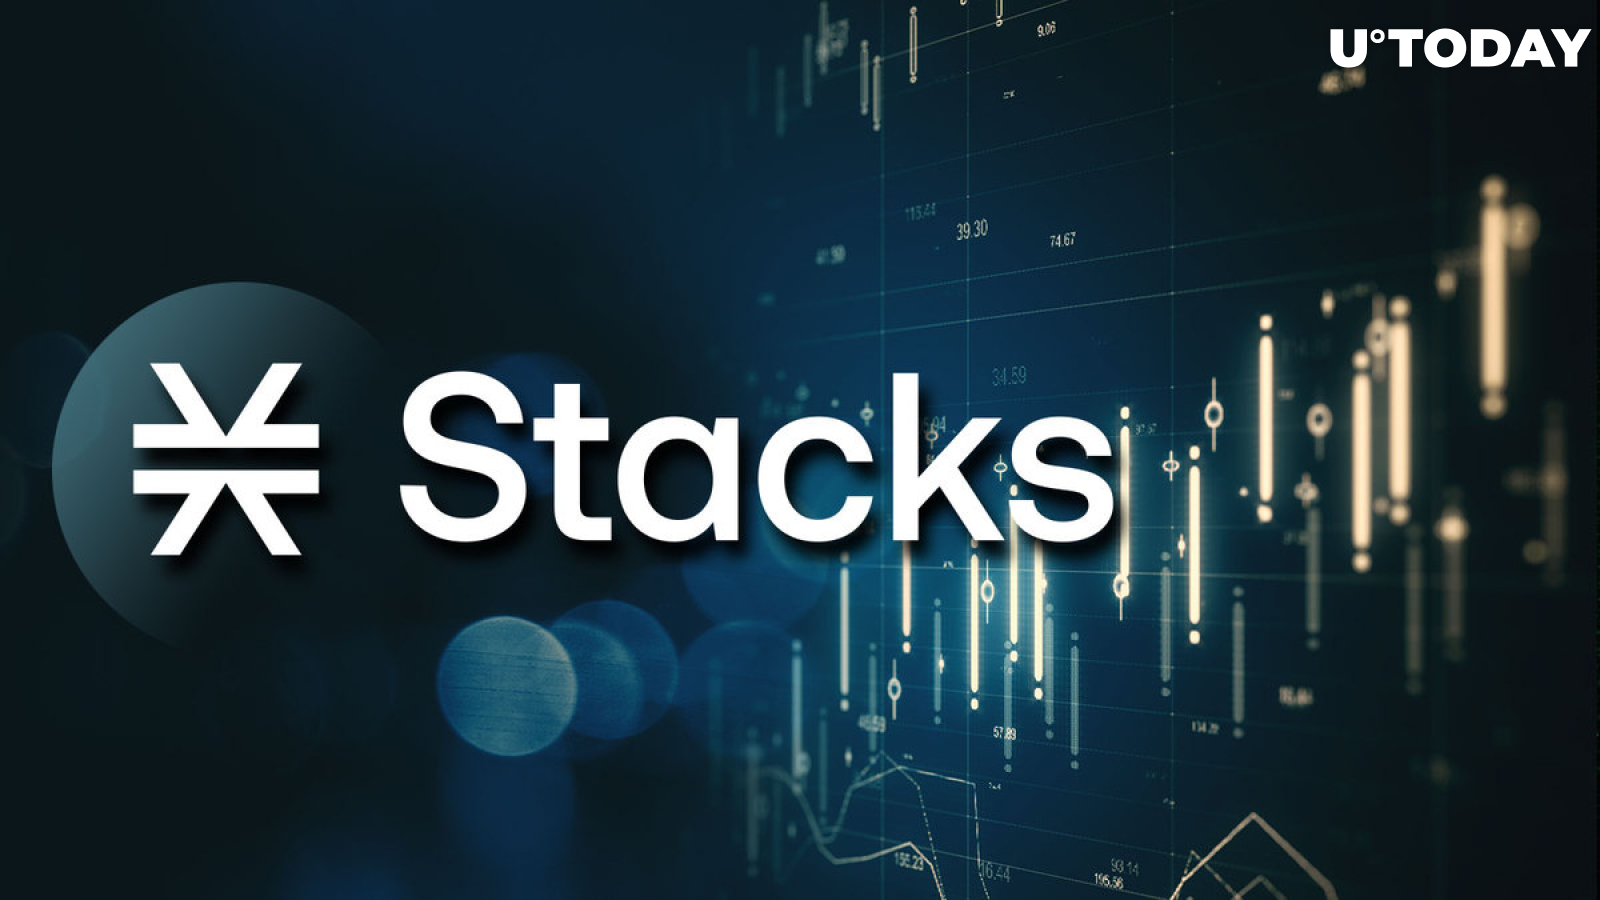 Stacks (STX) Suddenly Jumps 16% as Market Declines, This Might Be Reason